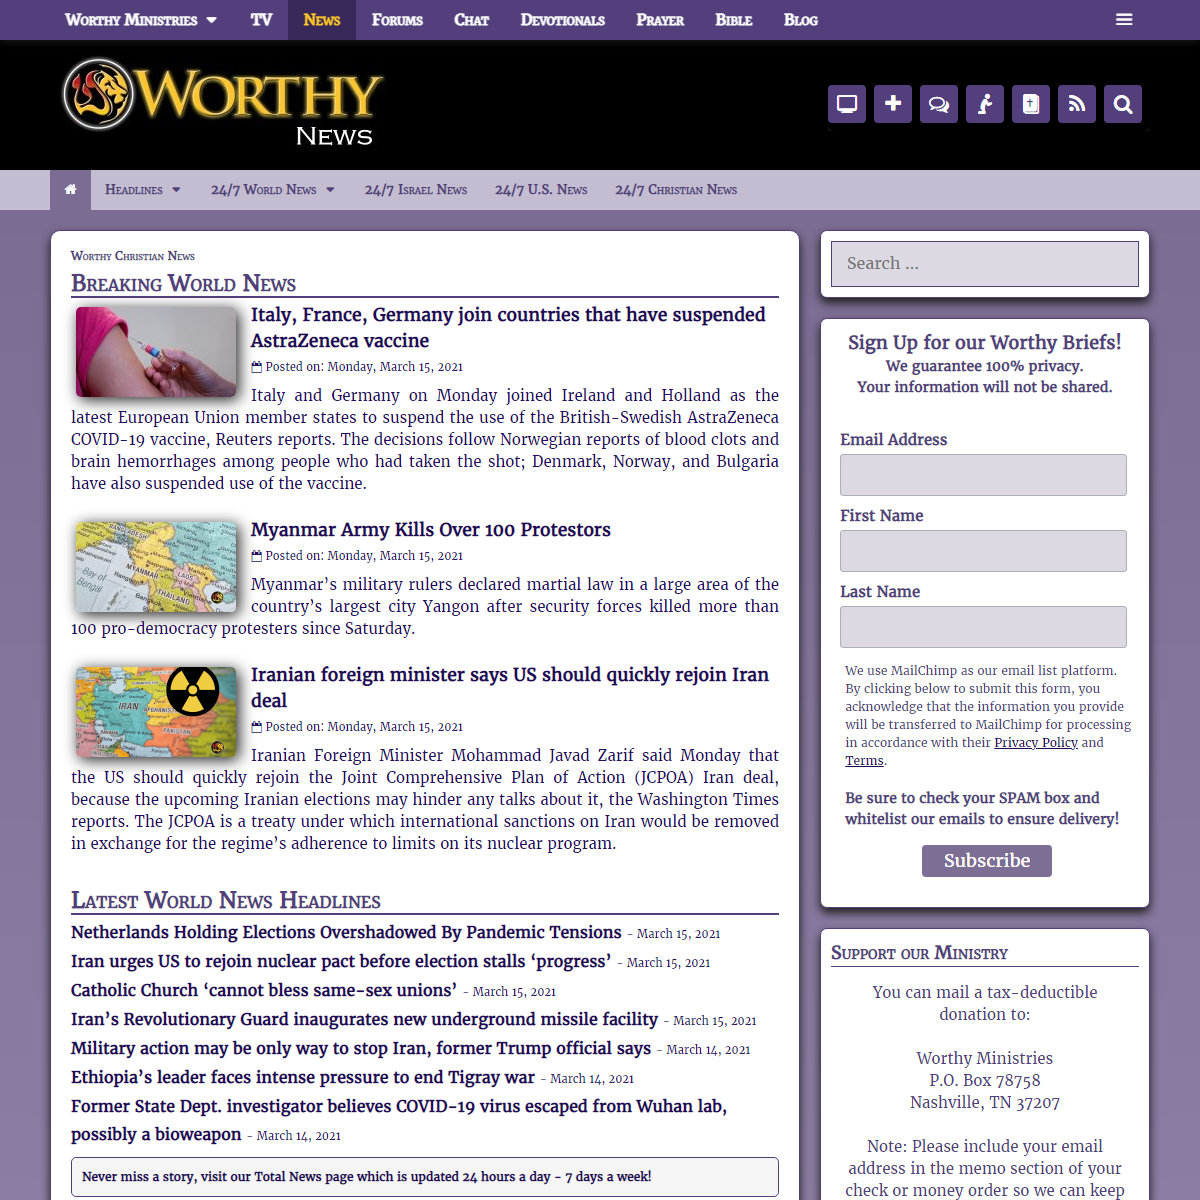 A complete backup of https://www.worthynews.com/